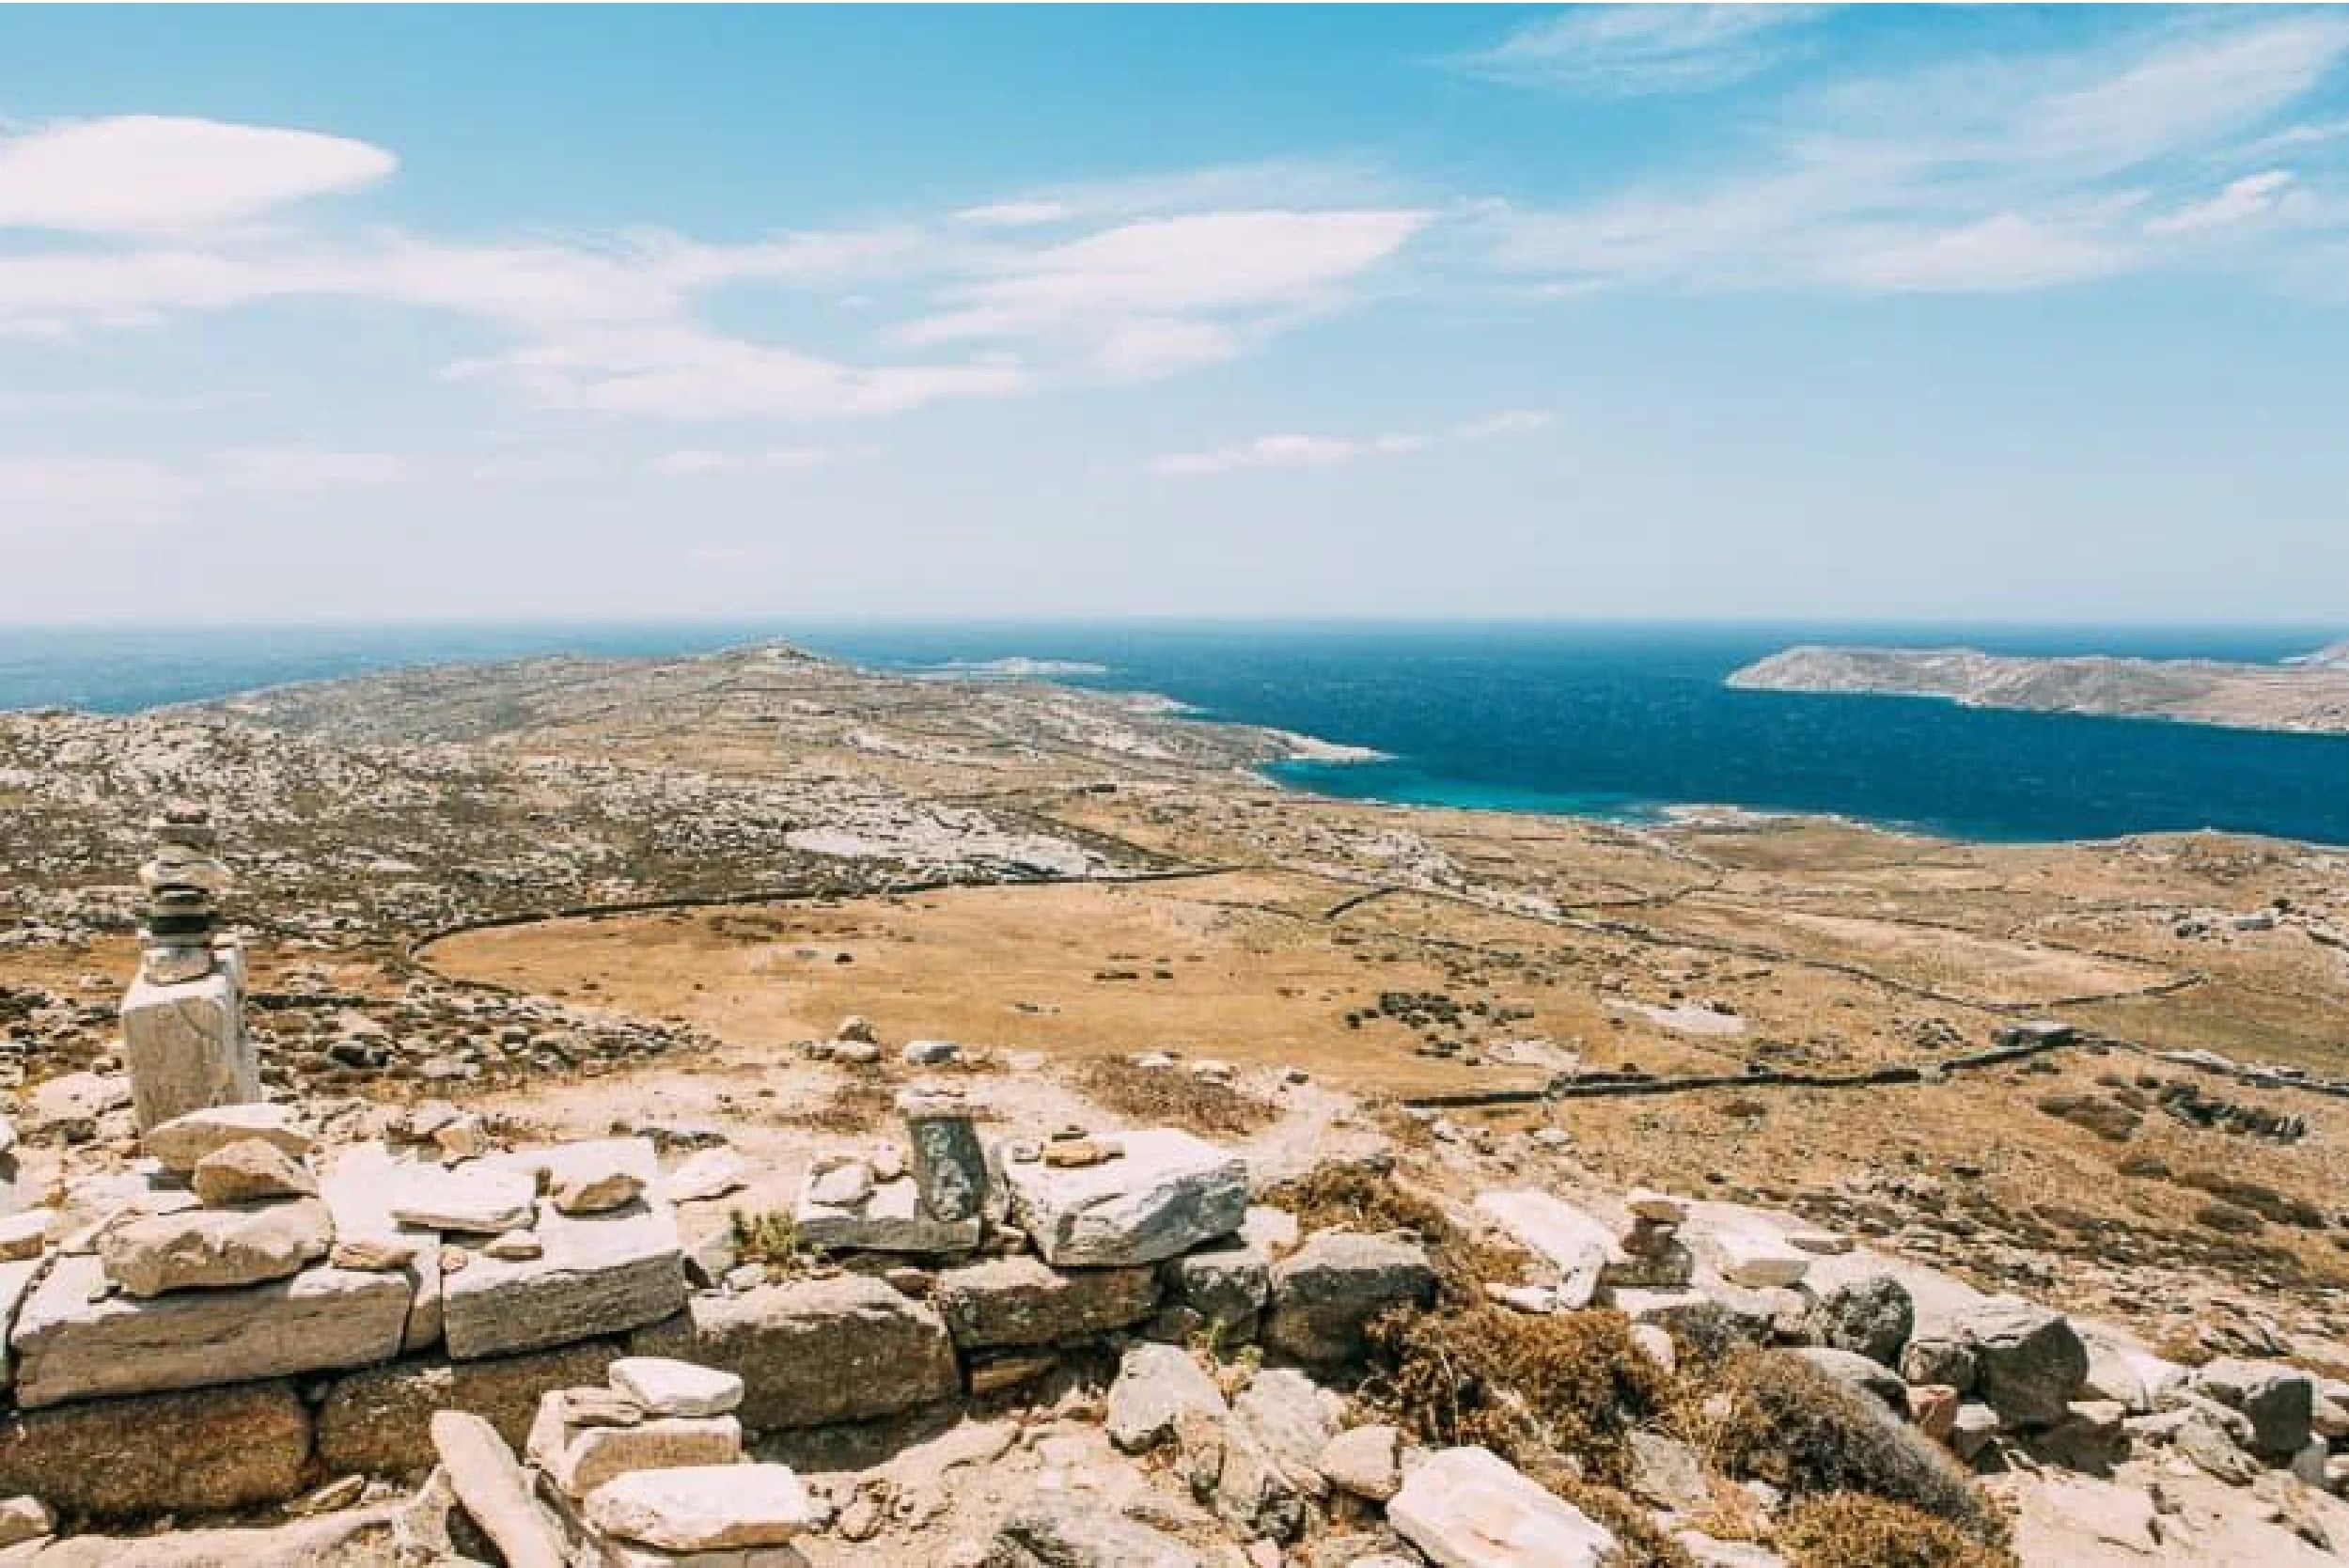 visit-the-island-of-delos-cyclades-sea-view-from-mount-cynthe-min